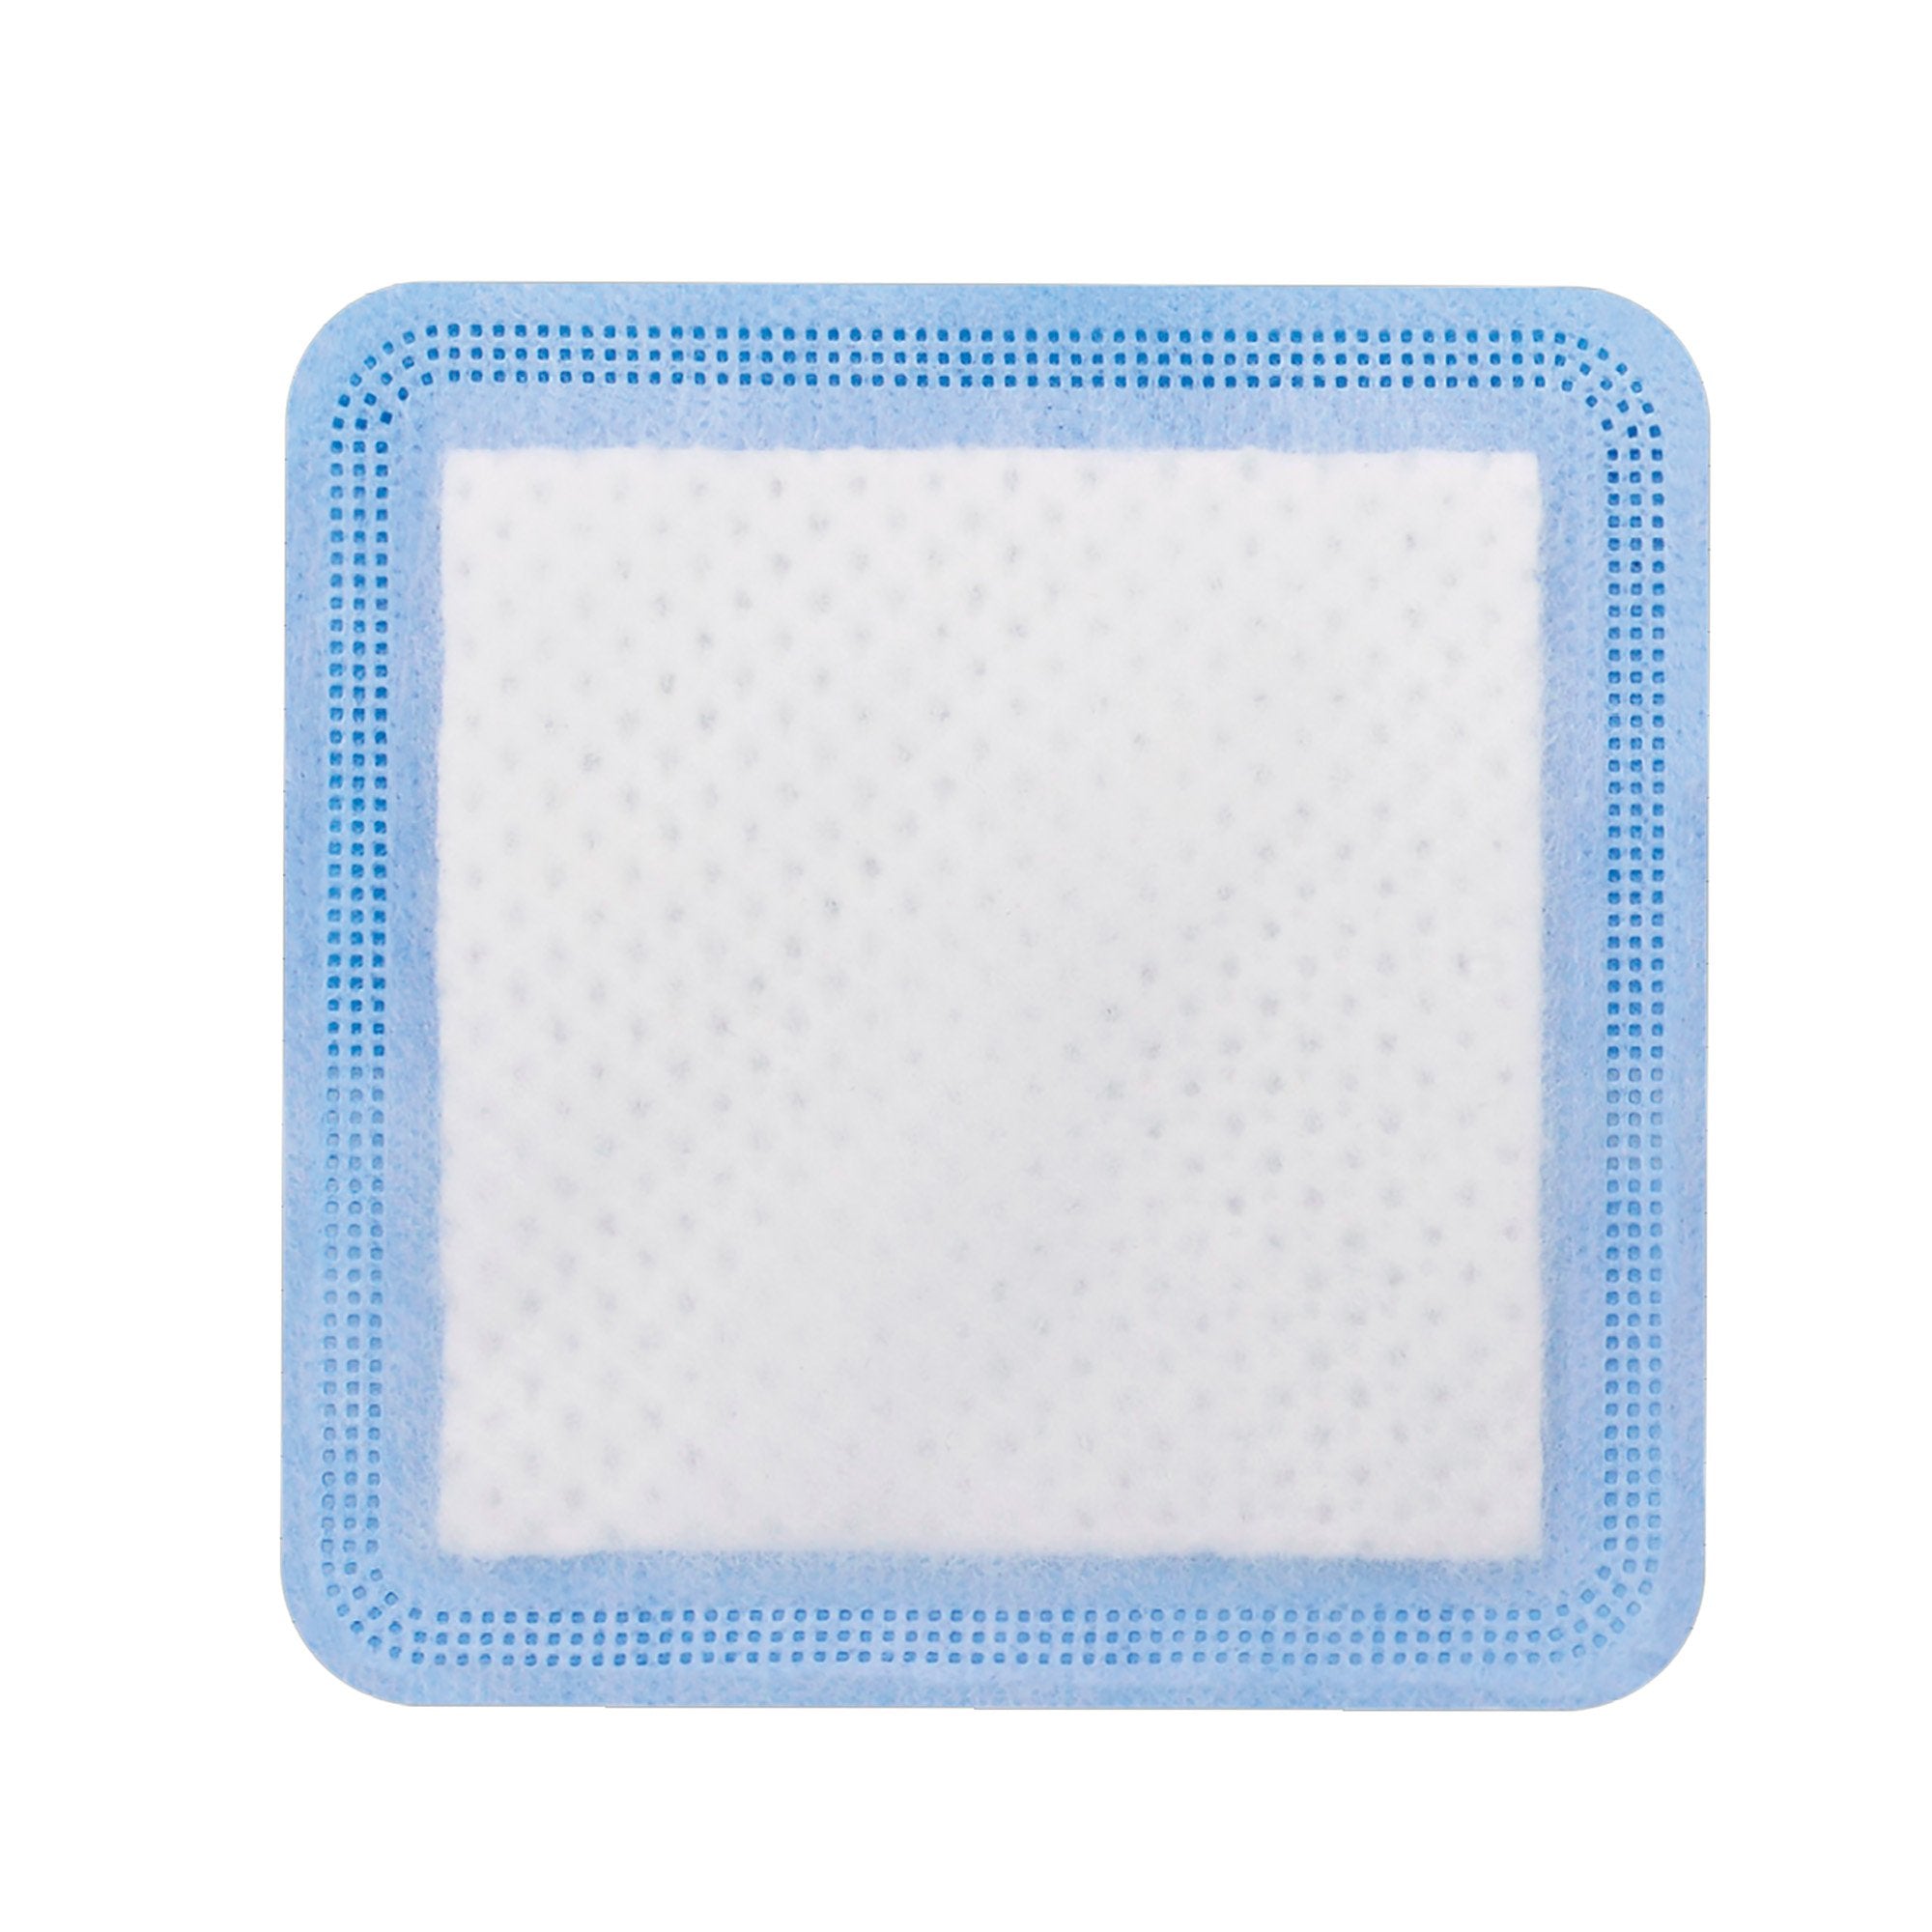 Super Absorbent Dressing ConvaMax™ Superabsorber Adhesive 4 X 4 Inch Square